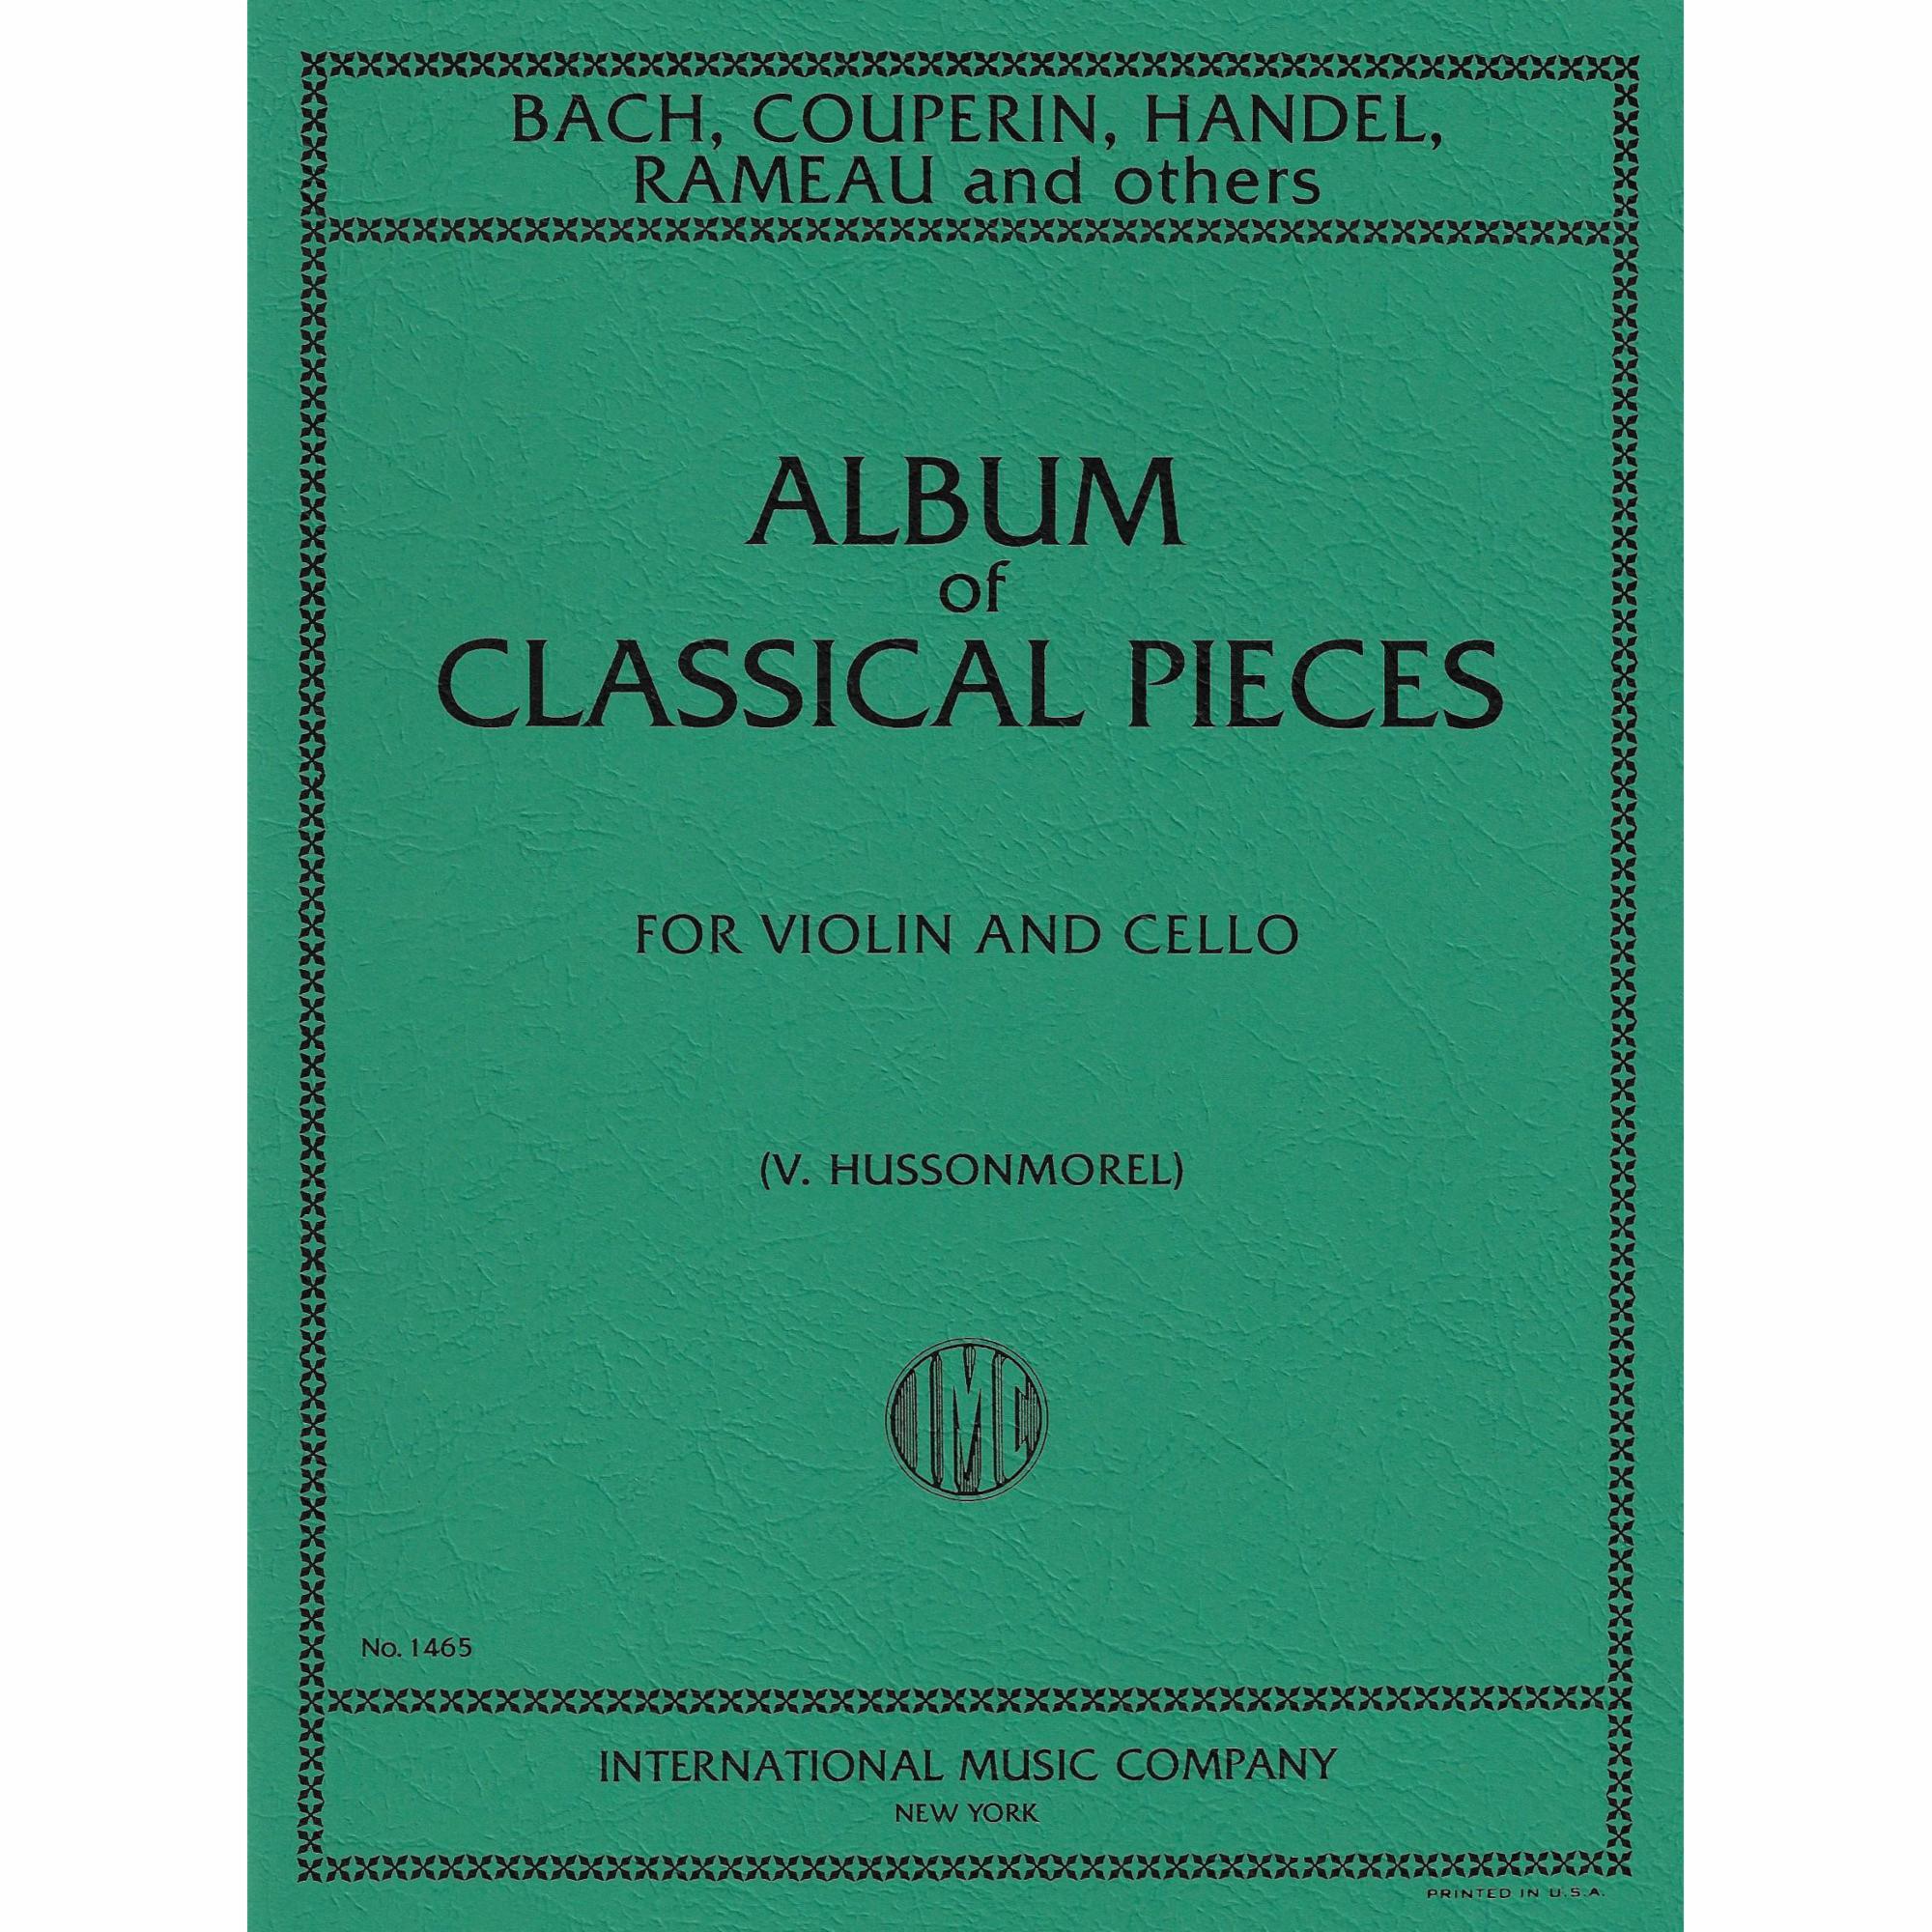 Album of Classical Pieces for Violin and Cello